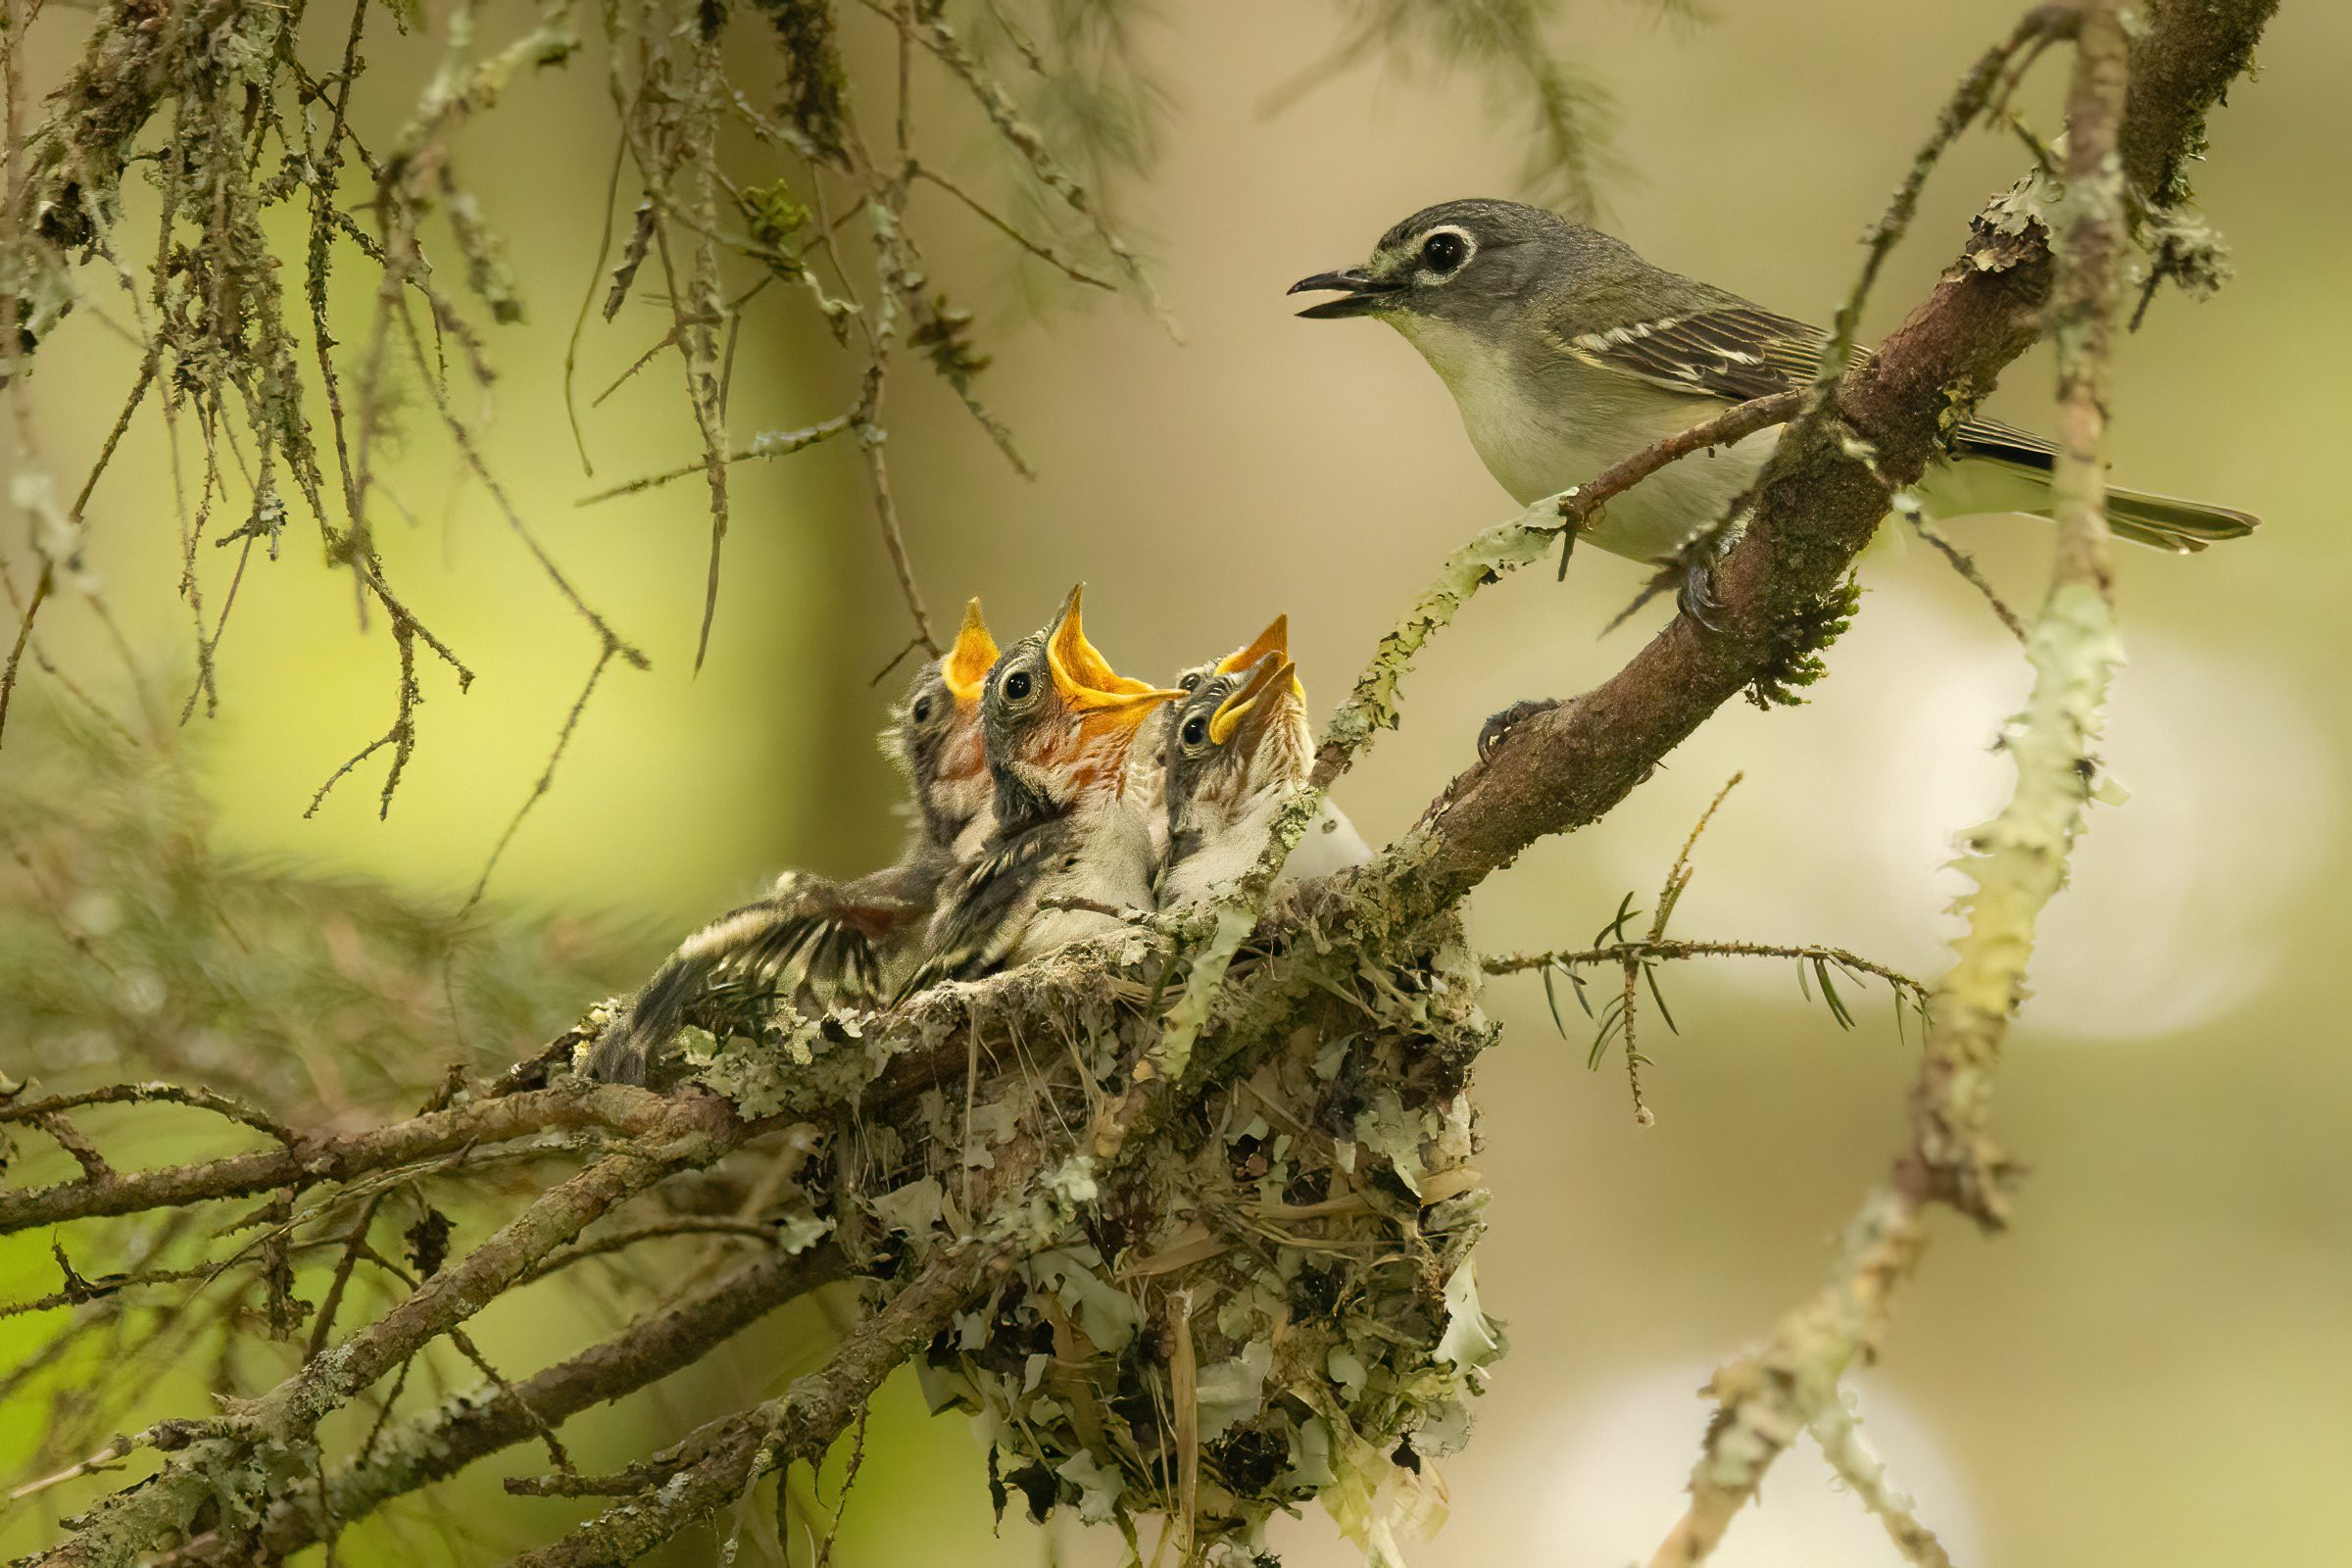 A green-gray patterned bird with white facial markings at its nest full of 4 chicks.